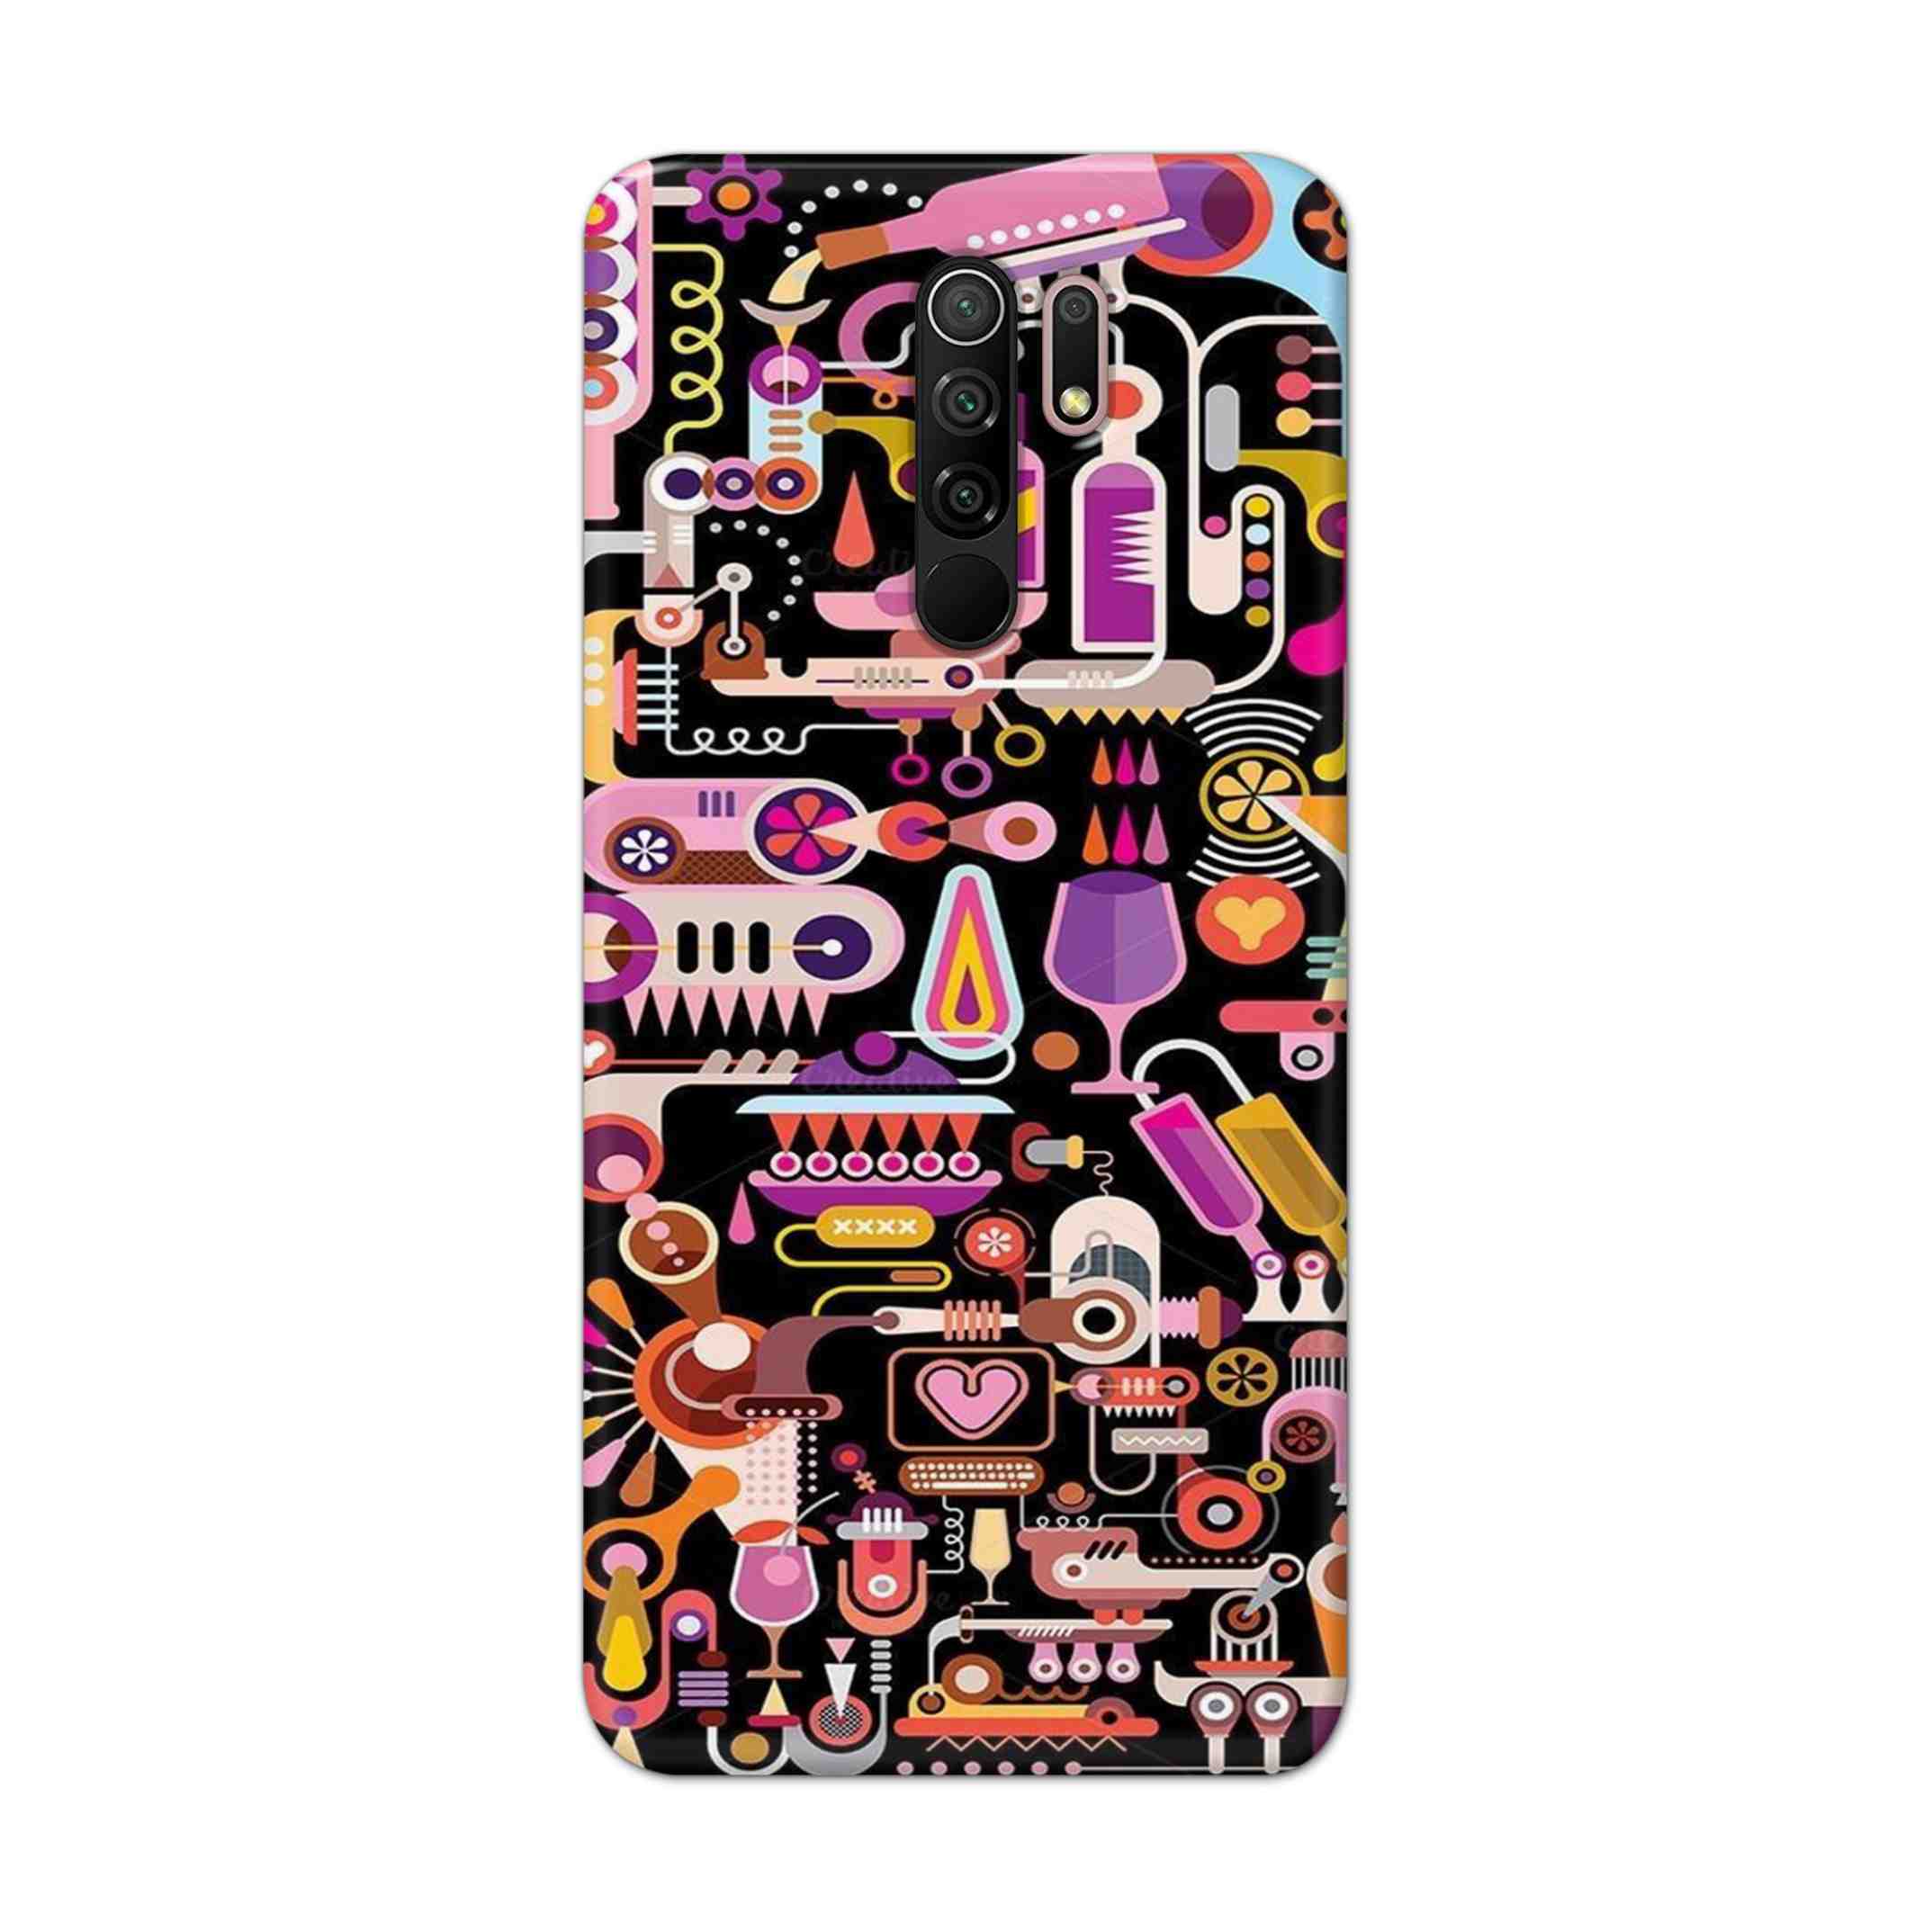 Buy Lab Art Hard Back Mobile Phone Case Cover For Xiaomi Redmi 9 Prime Online